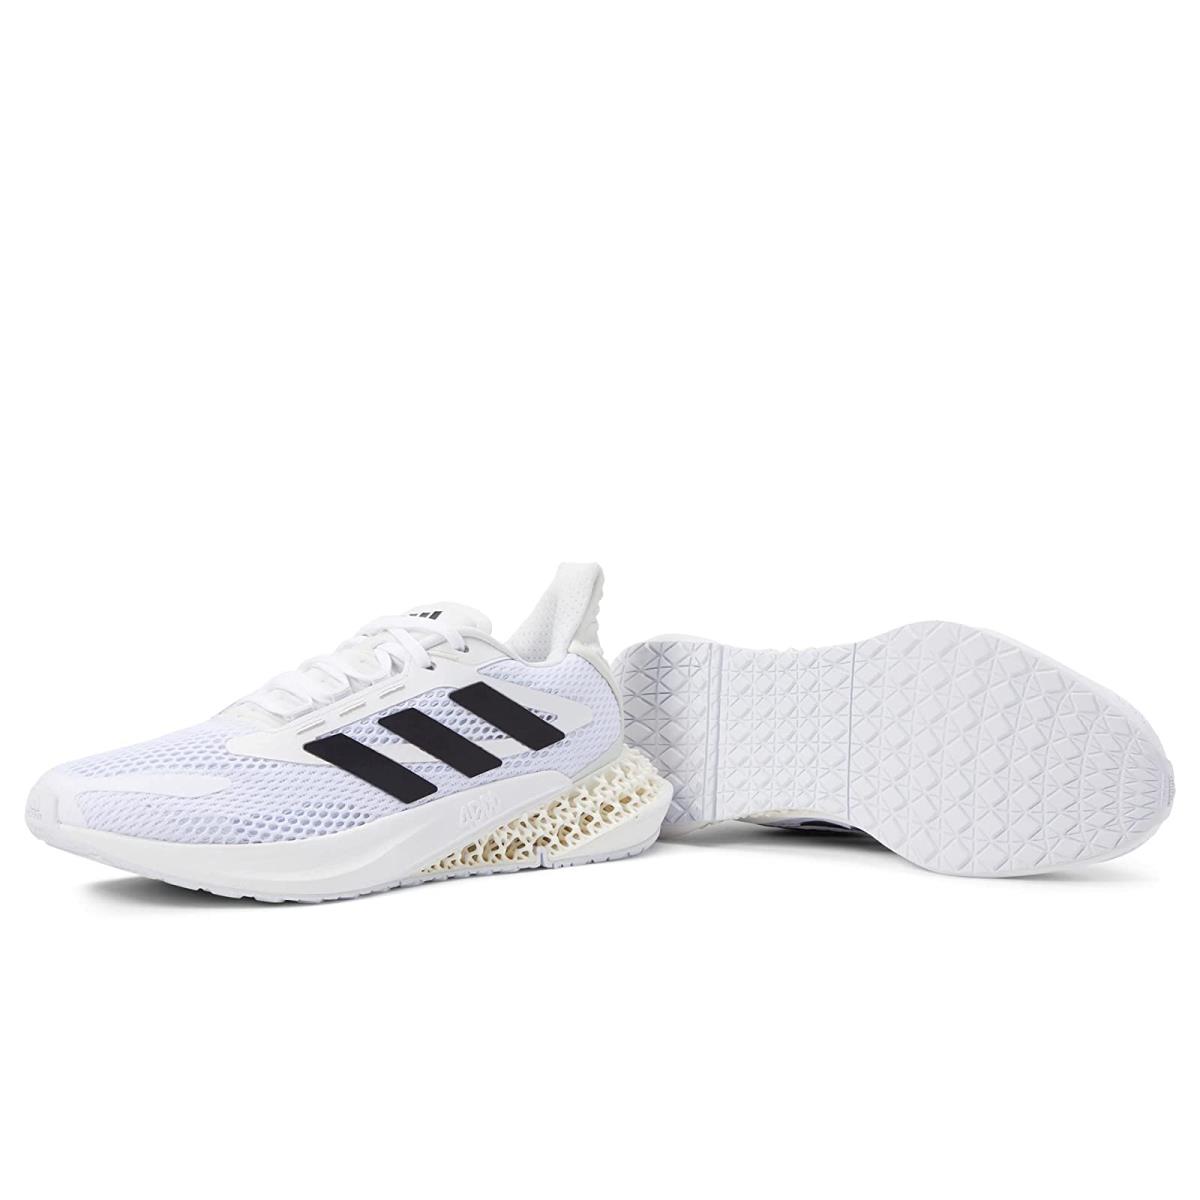 Man`s Sneakers Athletic Shoes Adidas Running 4DFWD Kick White/Black/Crystal White